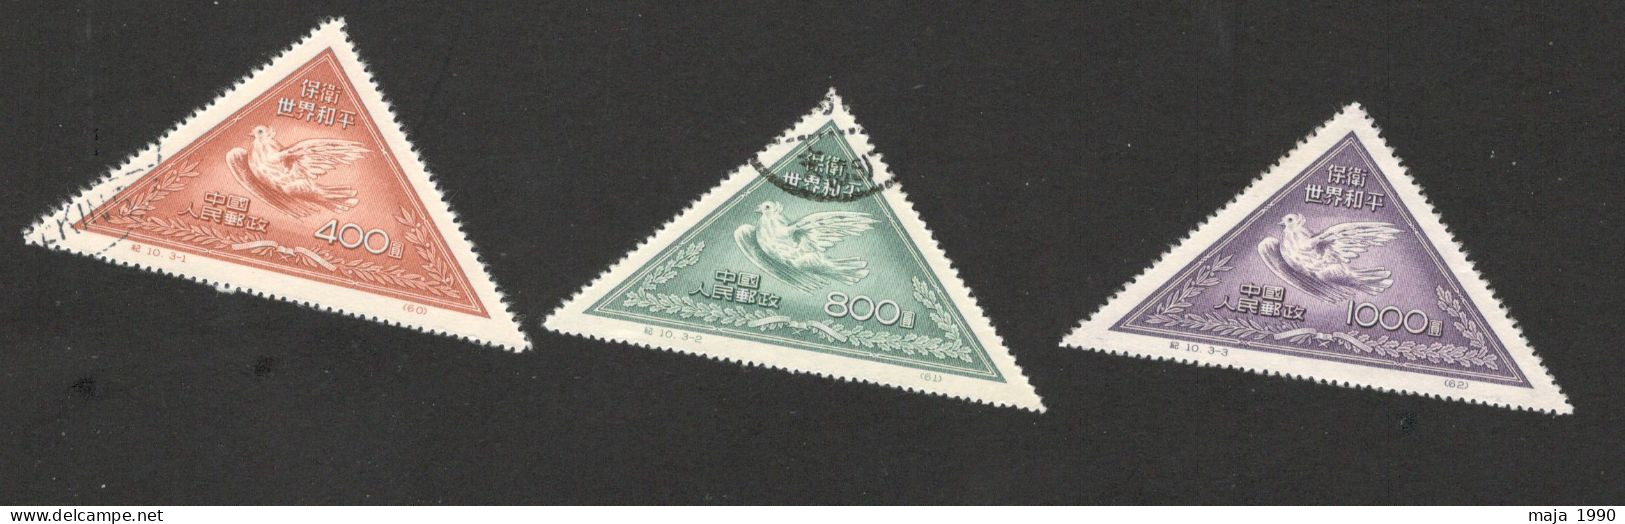 CHINA - USED/MNG SET- PEACE CAMPAIGN - 1951. - Gebruikt